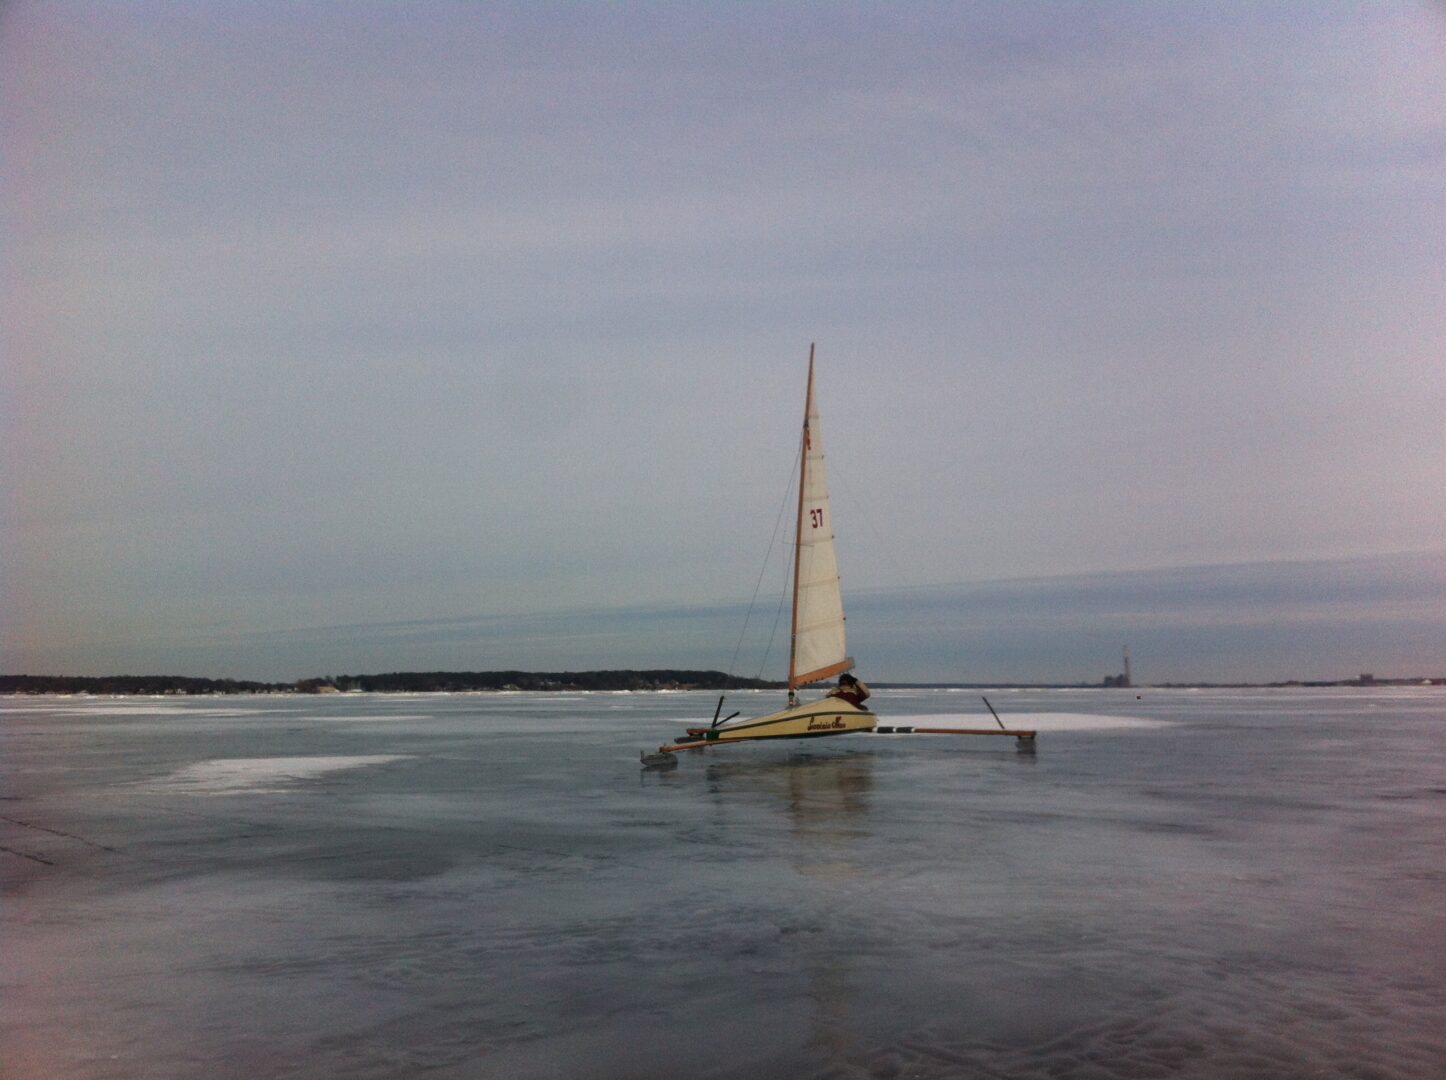 [VIDEO] Ice boats hit Muskegon Lake in fast action before winter storm closes most area schools